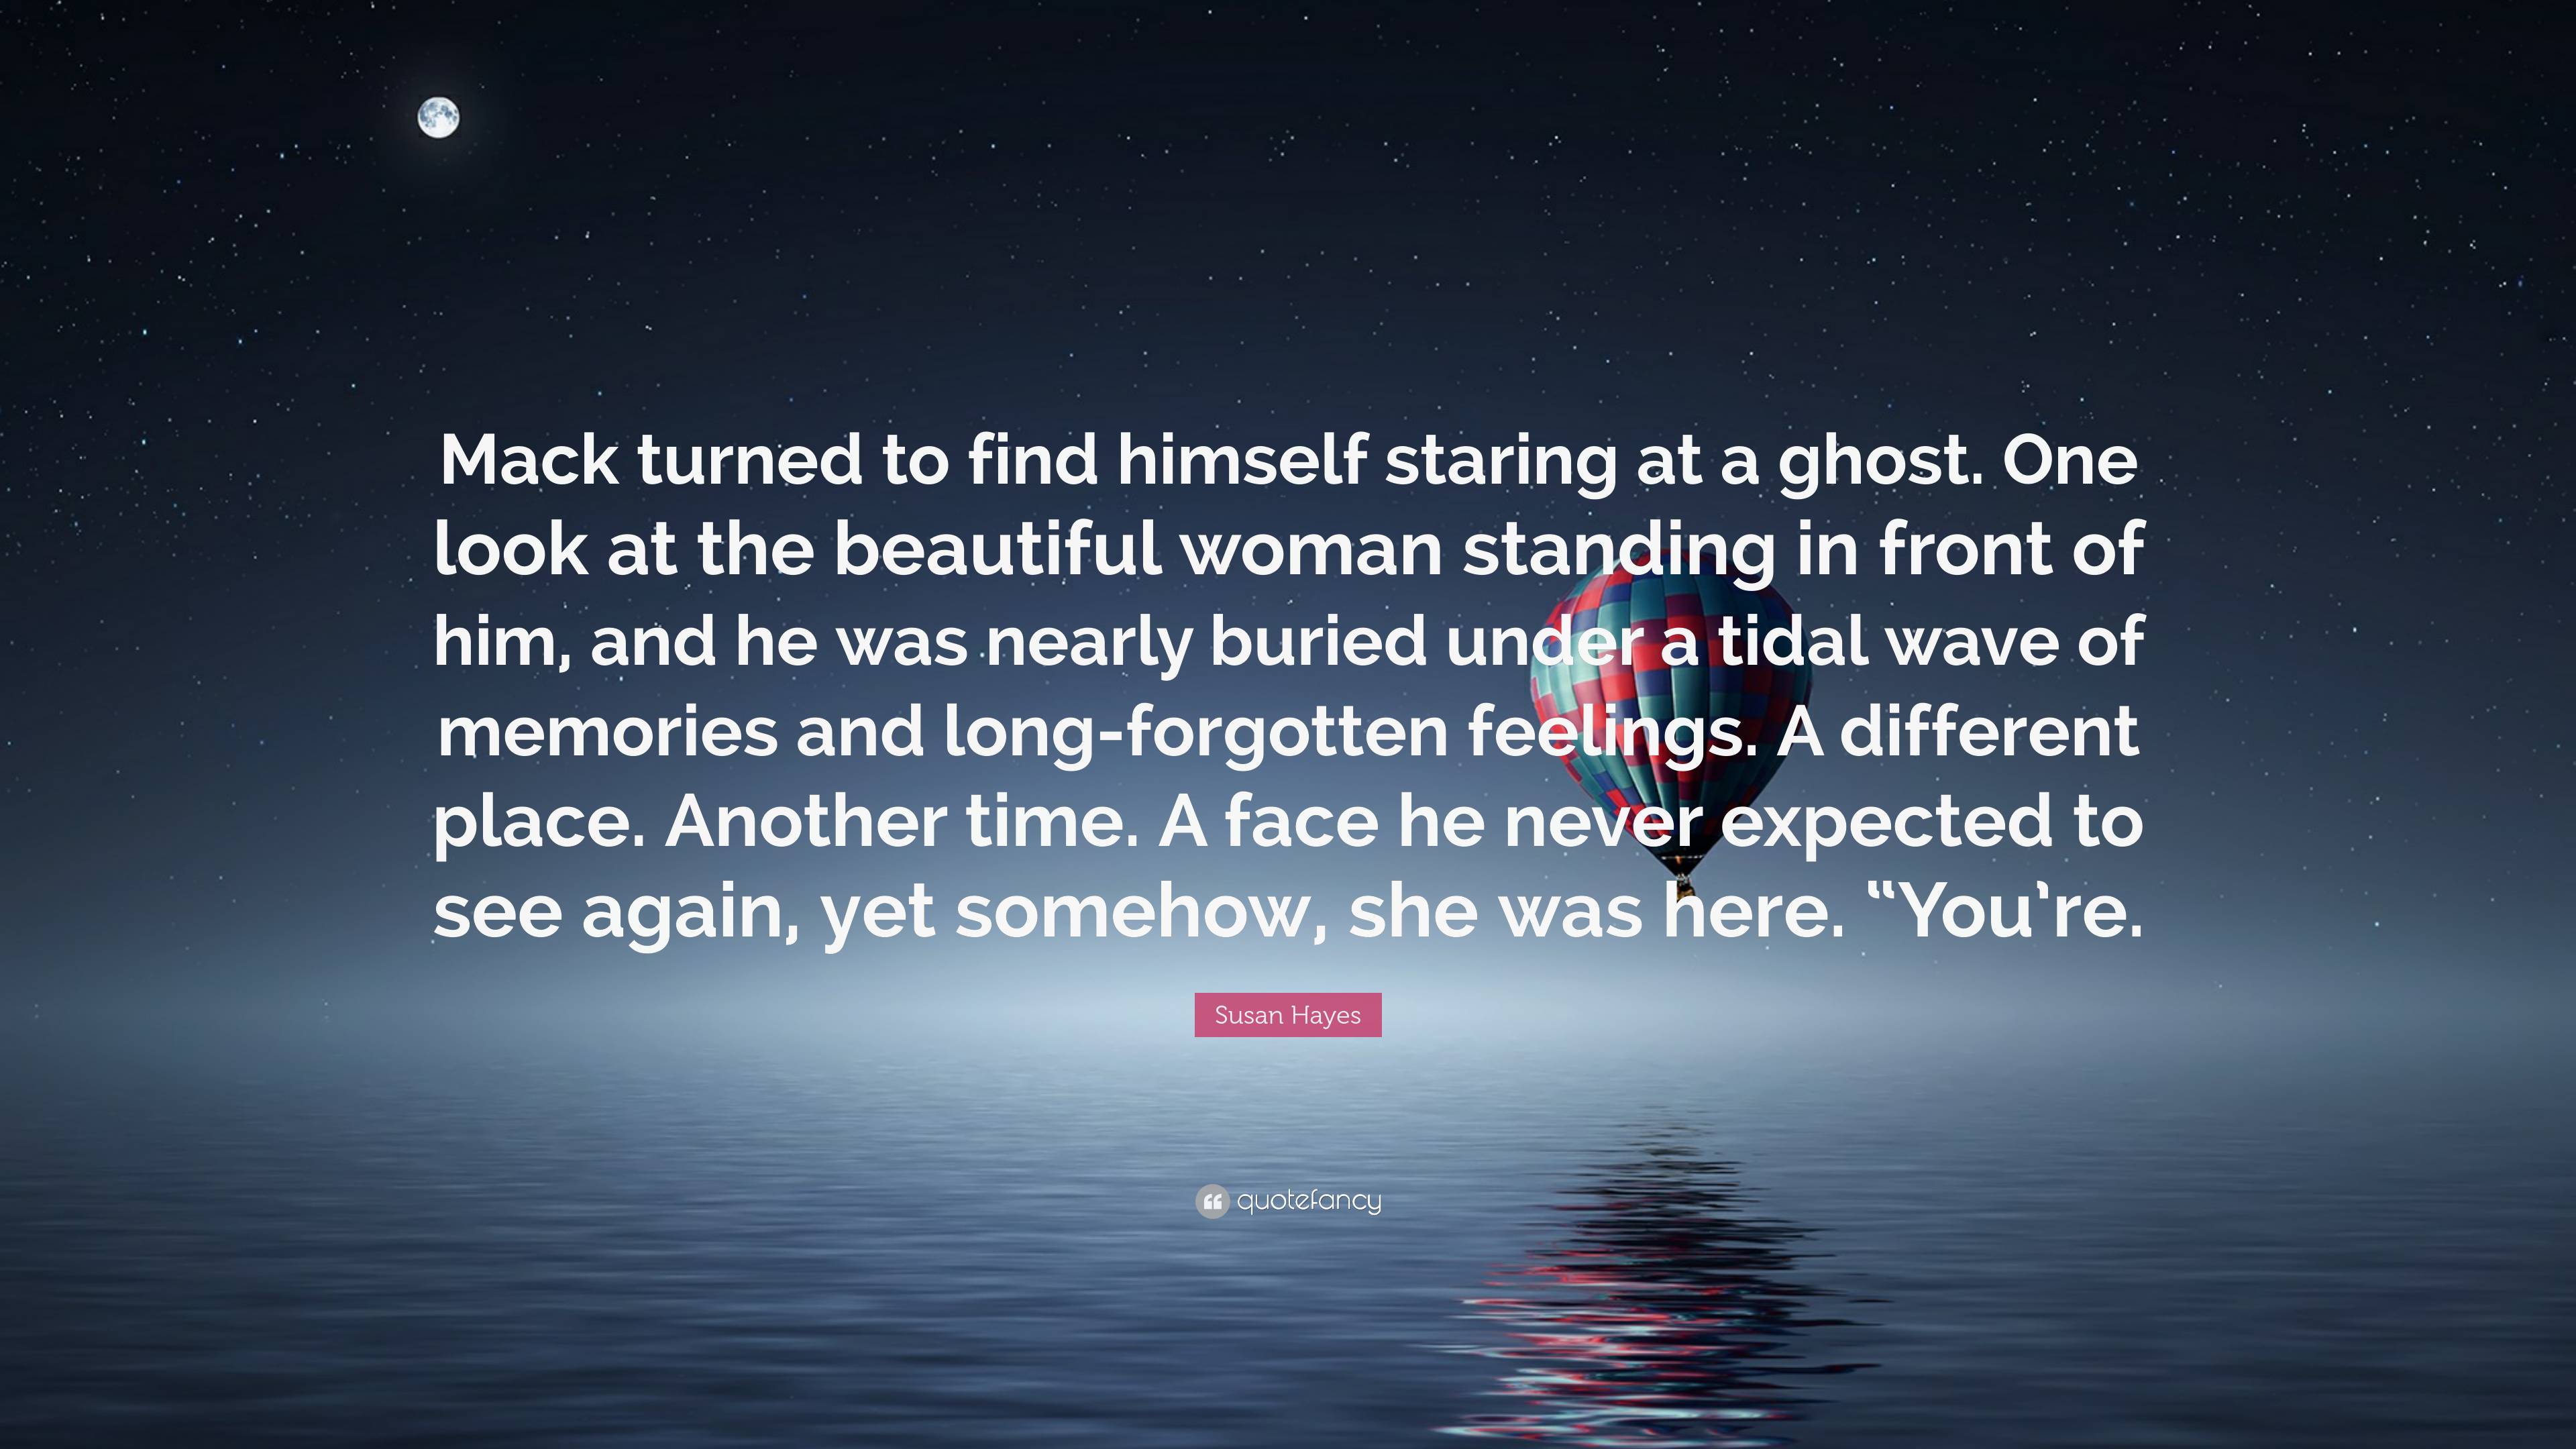 Susan Hayes Quote: “Mack turned to find himself staring at a ghost